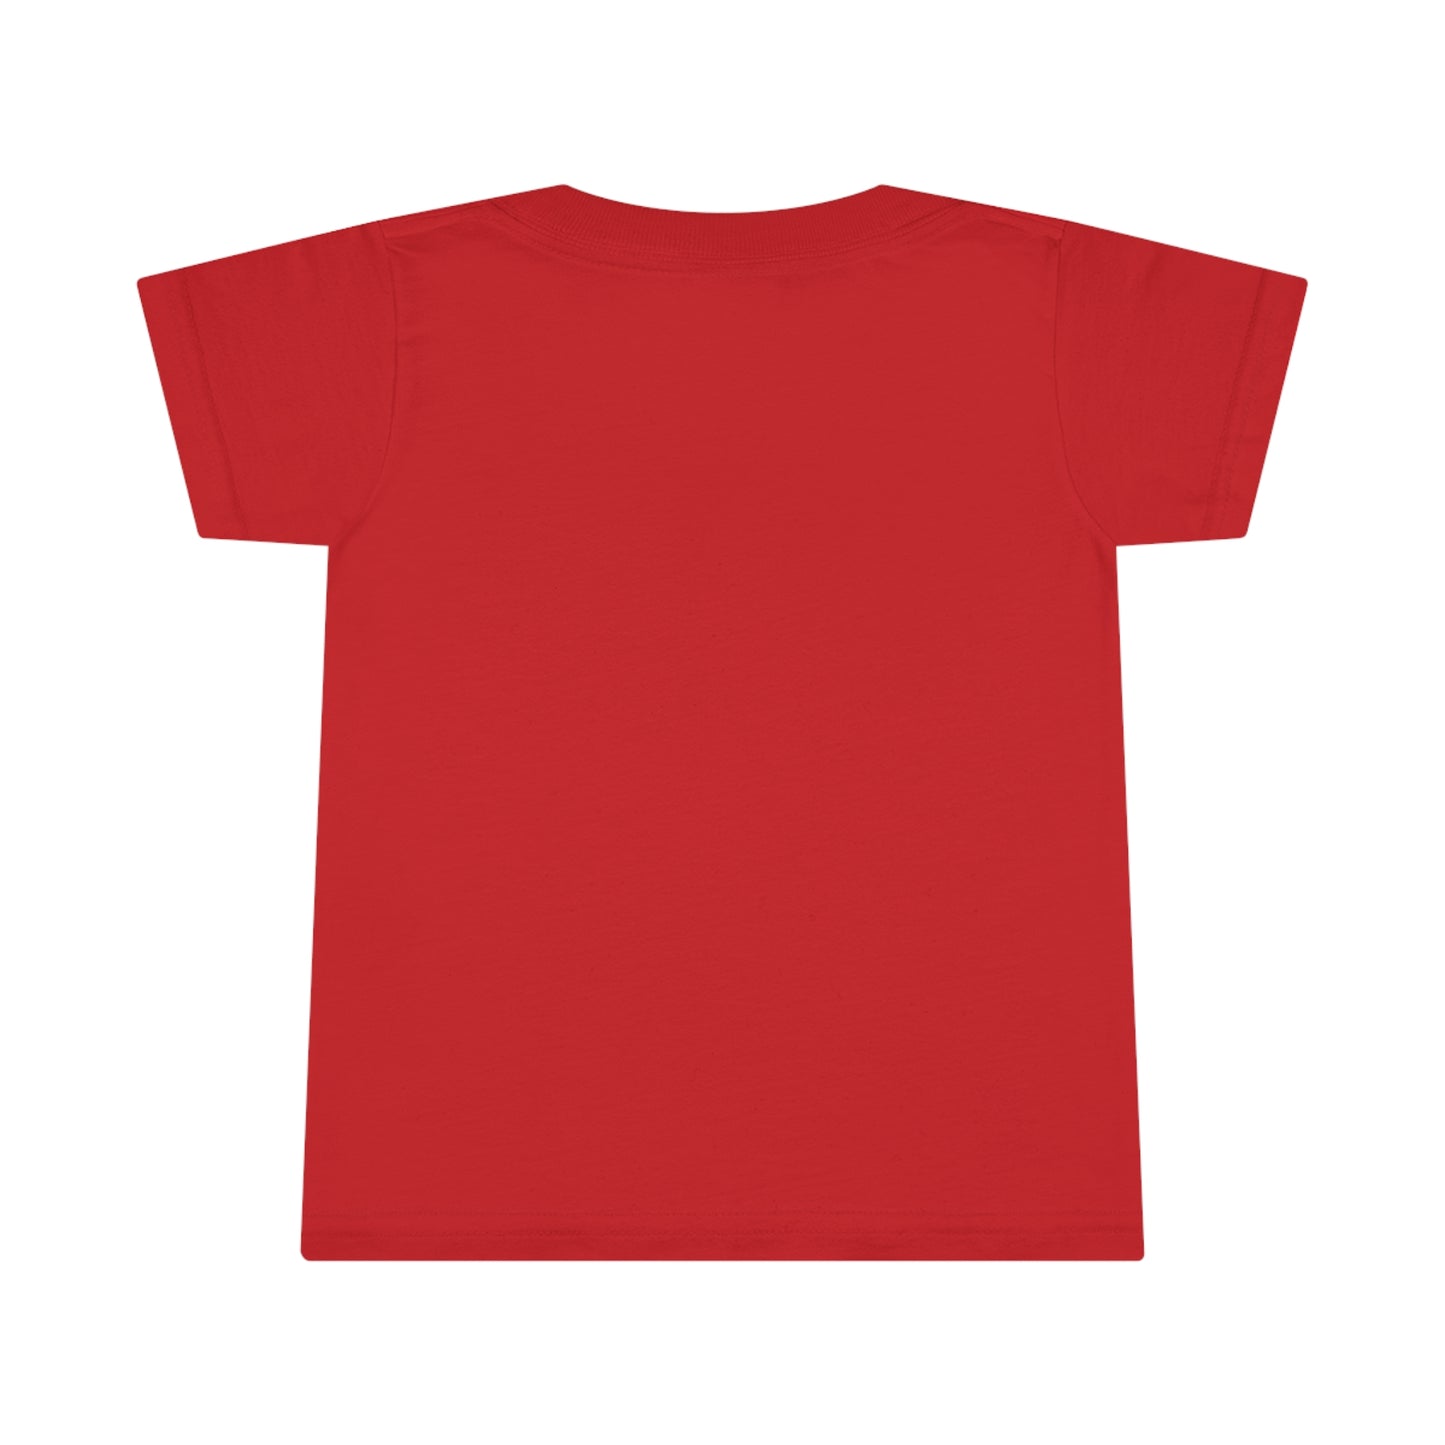 Rudolph The Red Nose Reindeer Toddler T-shirt